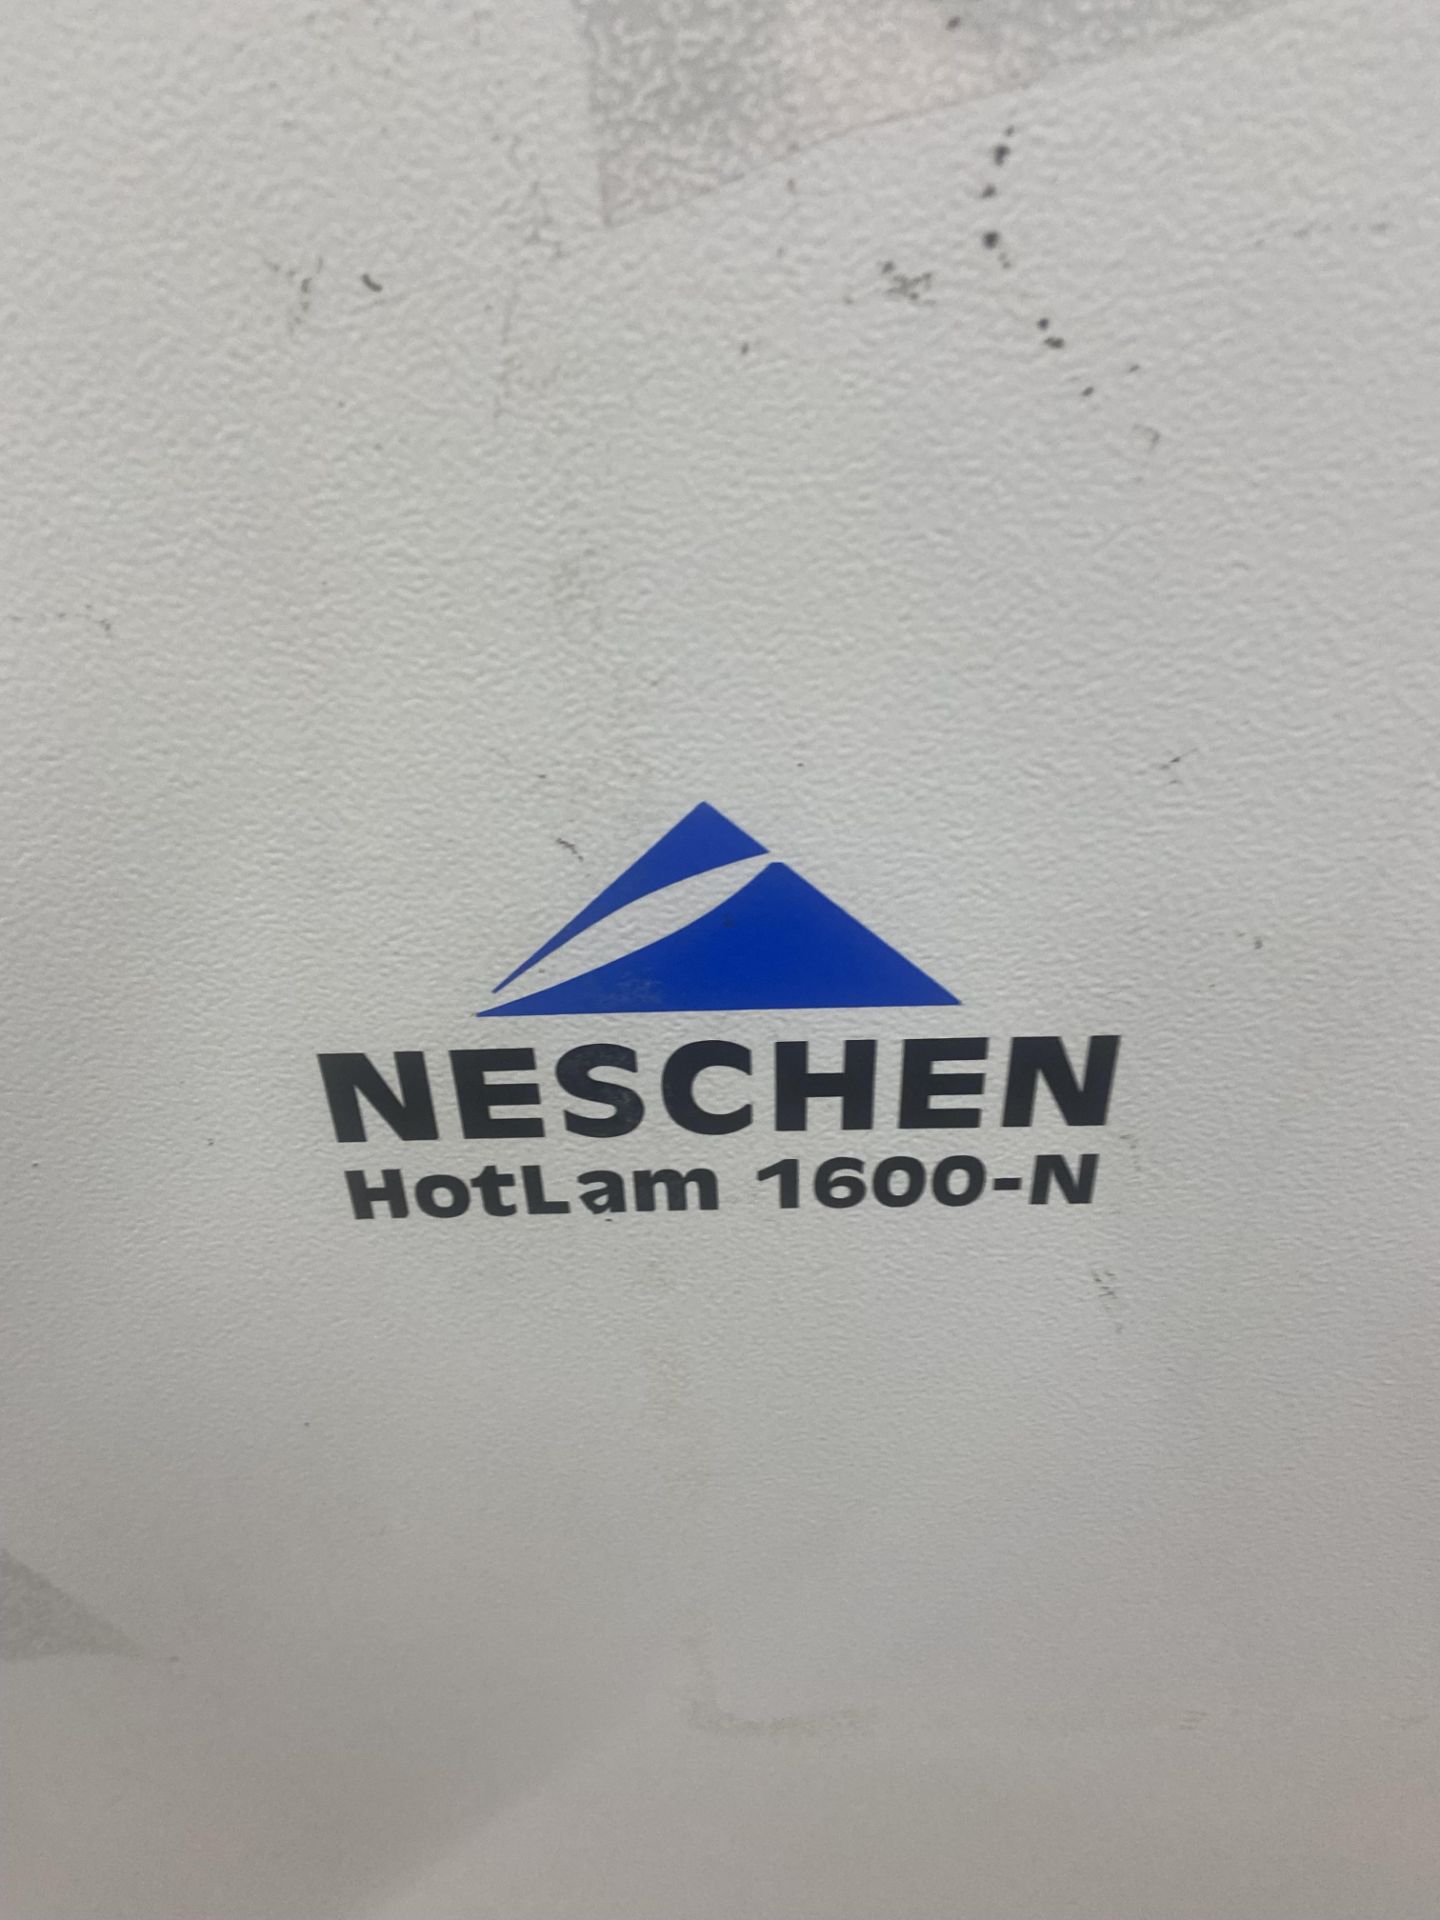 Neschen Hotlam 1600-N Laminator, serial no. 64036-00109, year of manufacture 2006, 440V (please note - Image 5 of 6